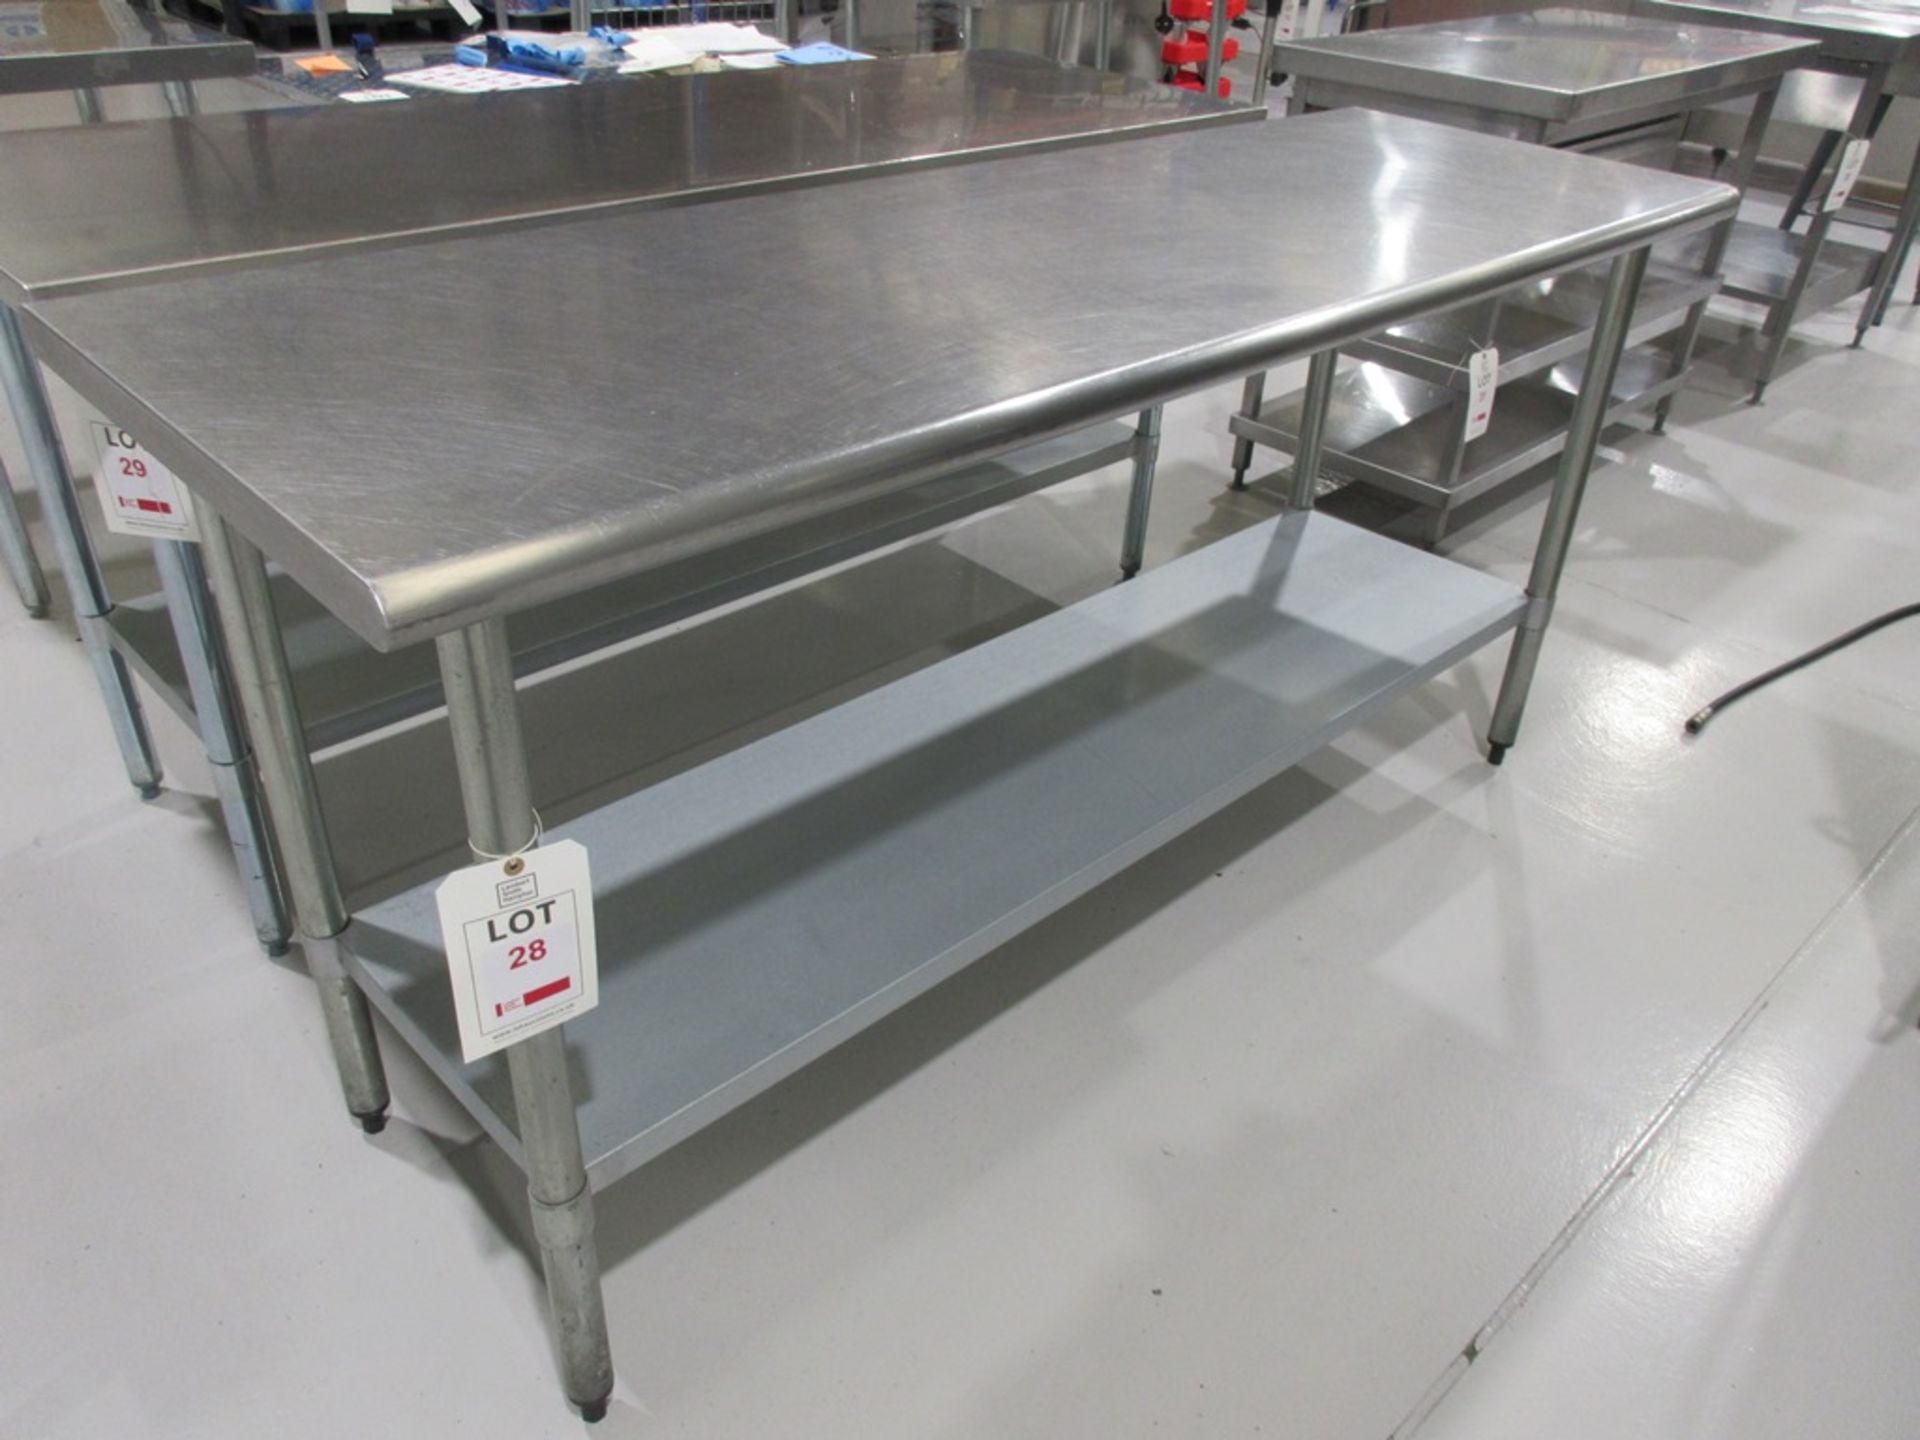 Stainless Steel preparation table with undershelf, size: 1830mm x 600mm x 890mm